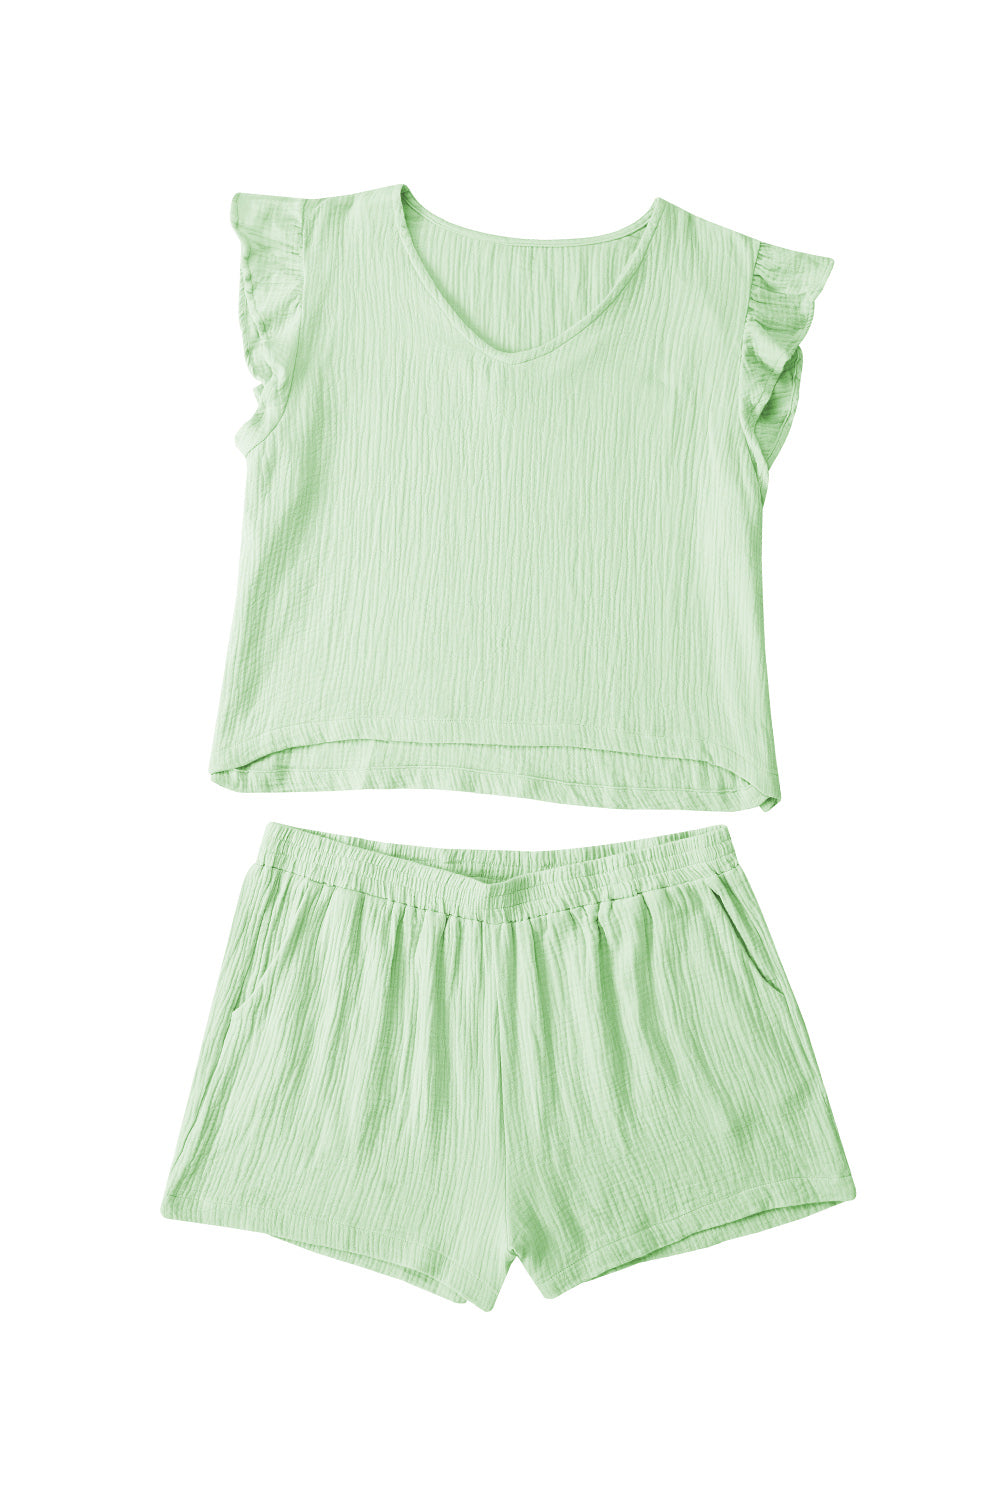 Green Crinkled Texture V Neck Ruffled Sleeve Tops and Shorts Set